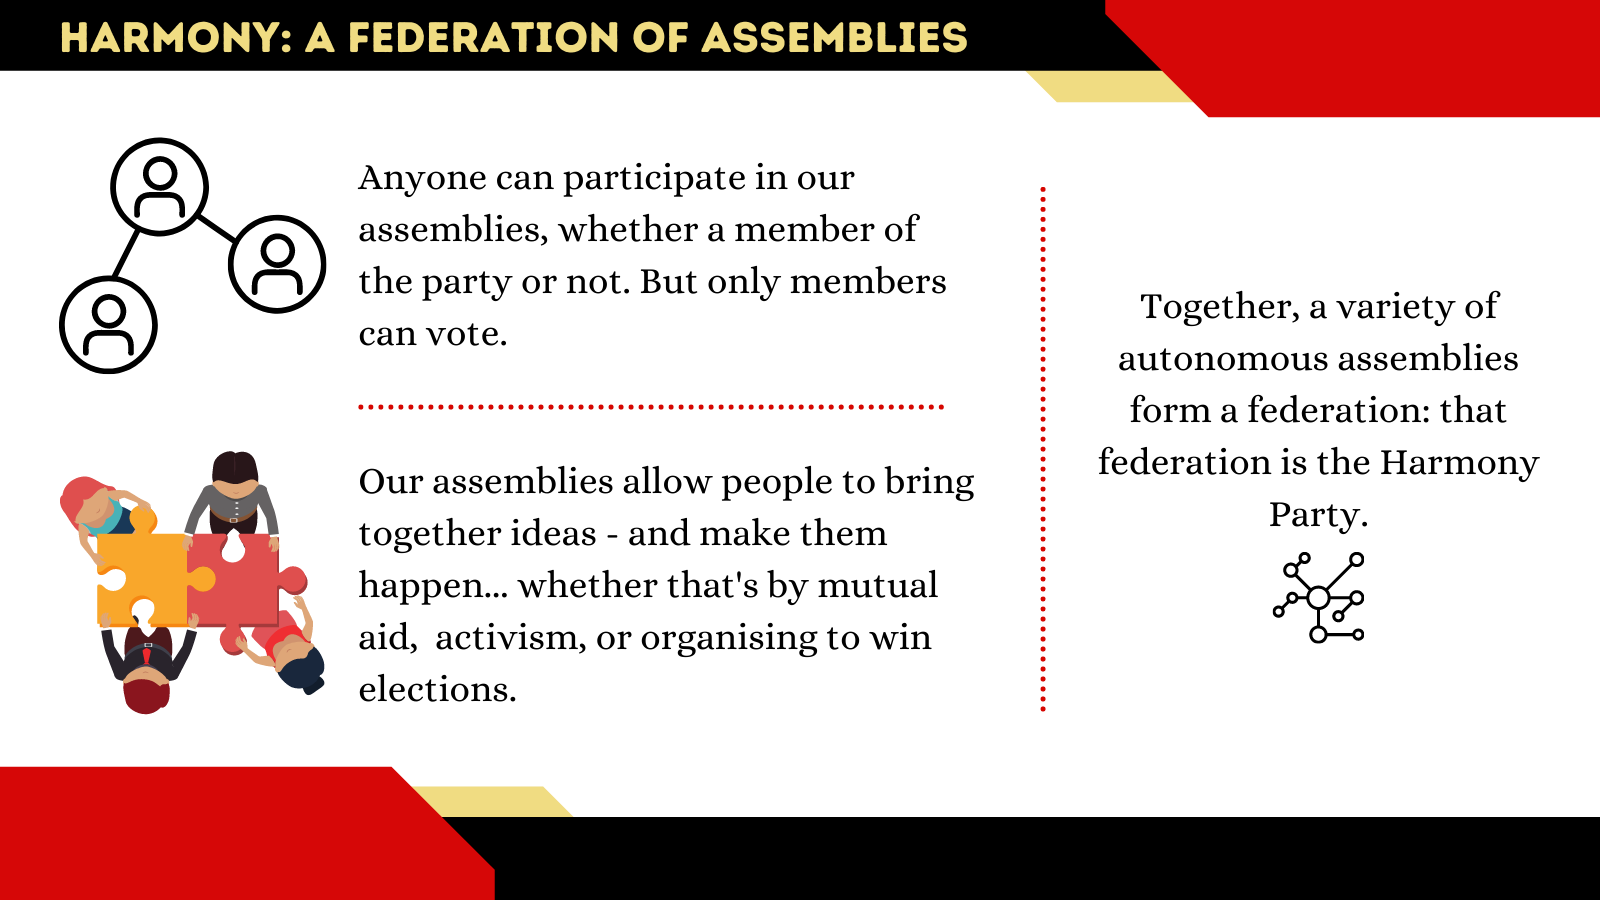 Harmony: a federation of assemblies Anyone can participate in our assemblies, whether a member of the party or not. But only members can vote. Our assemblies allow people to bring together ideas - and make them happen... whether that's by mutual aid, activism, or organising to win elections. Together, a variety of autonomous assemblies form a federation: that federation is the Harmony Party.